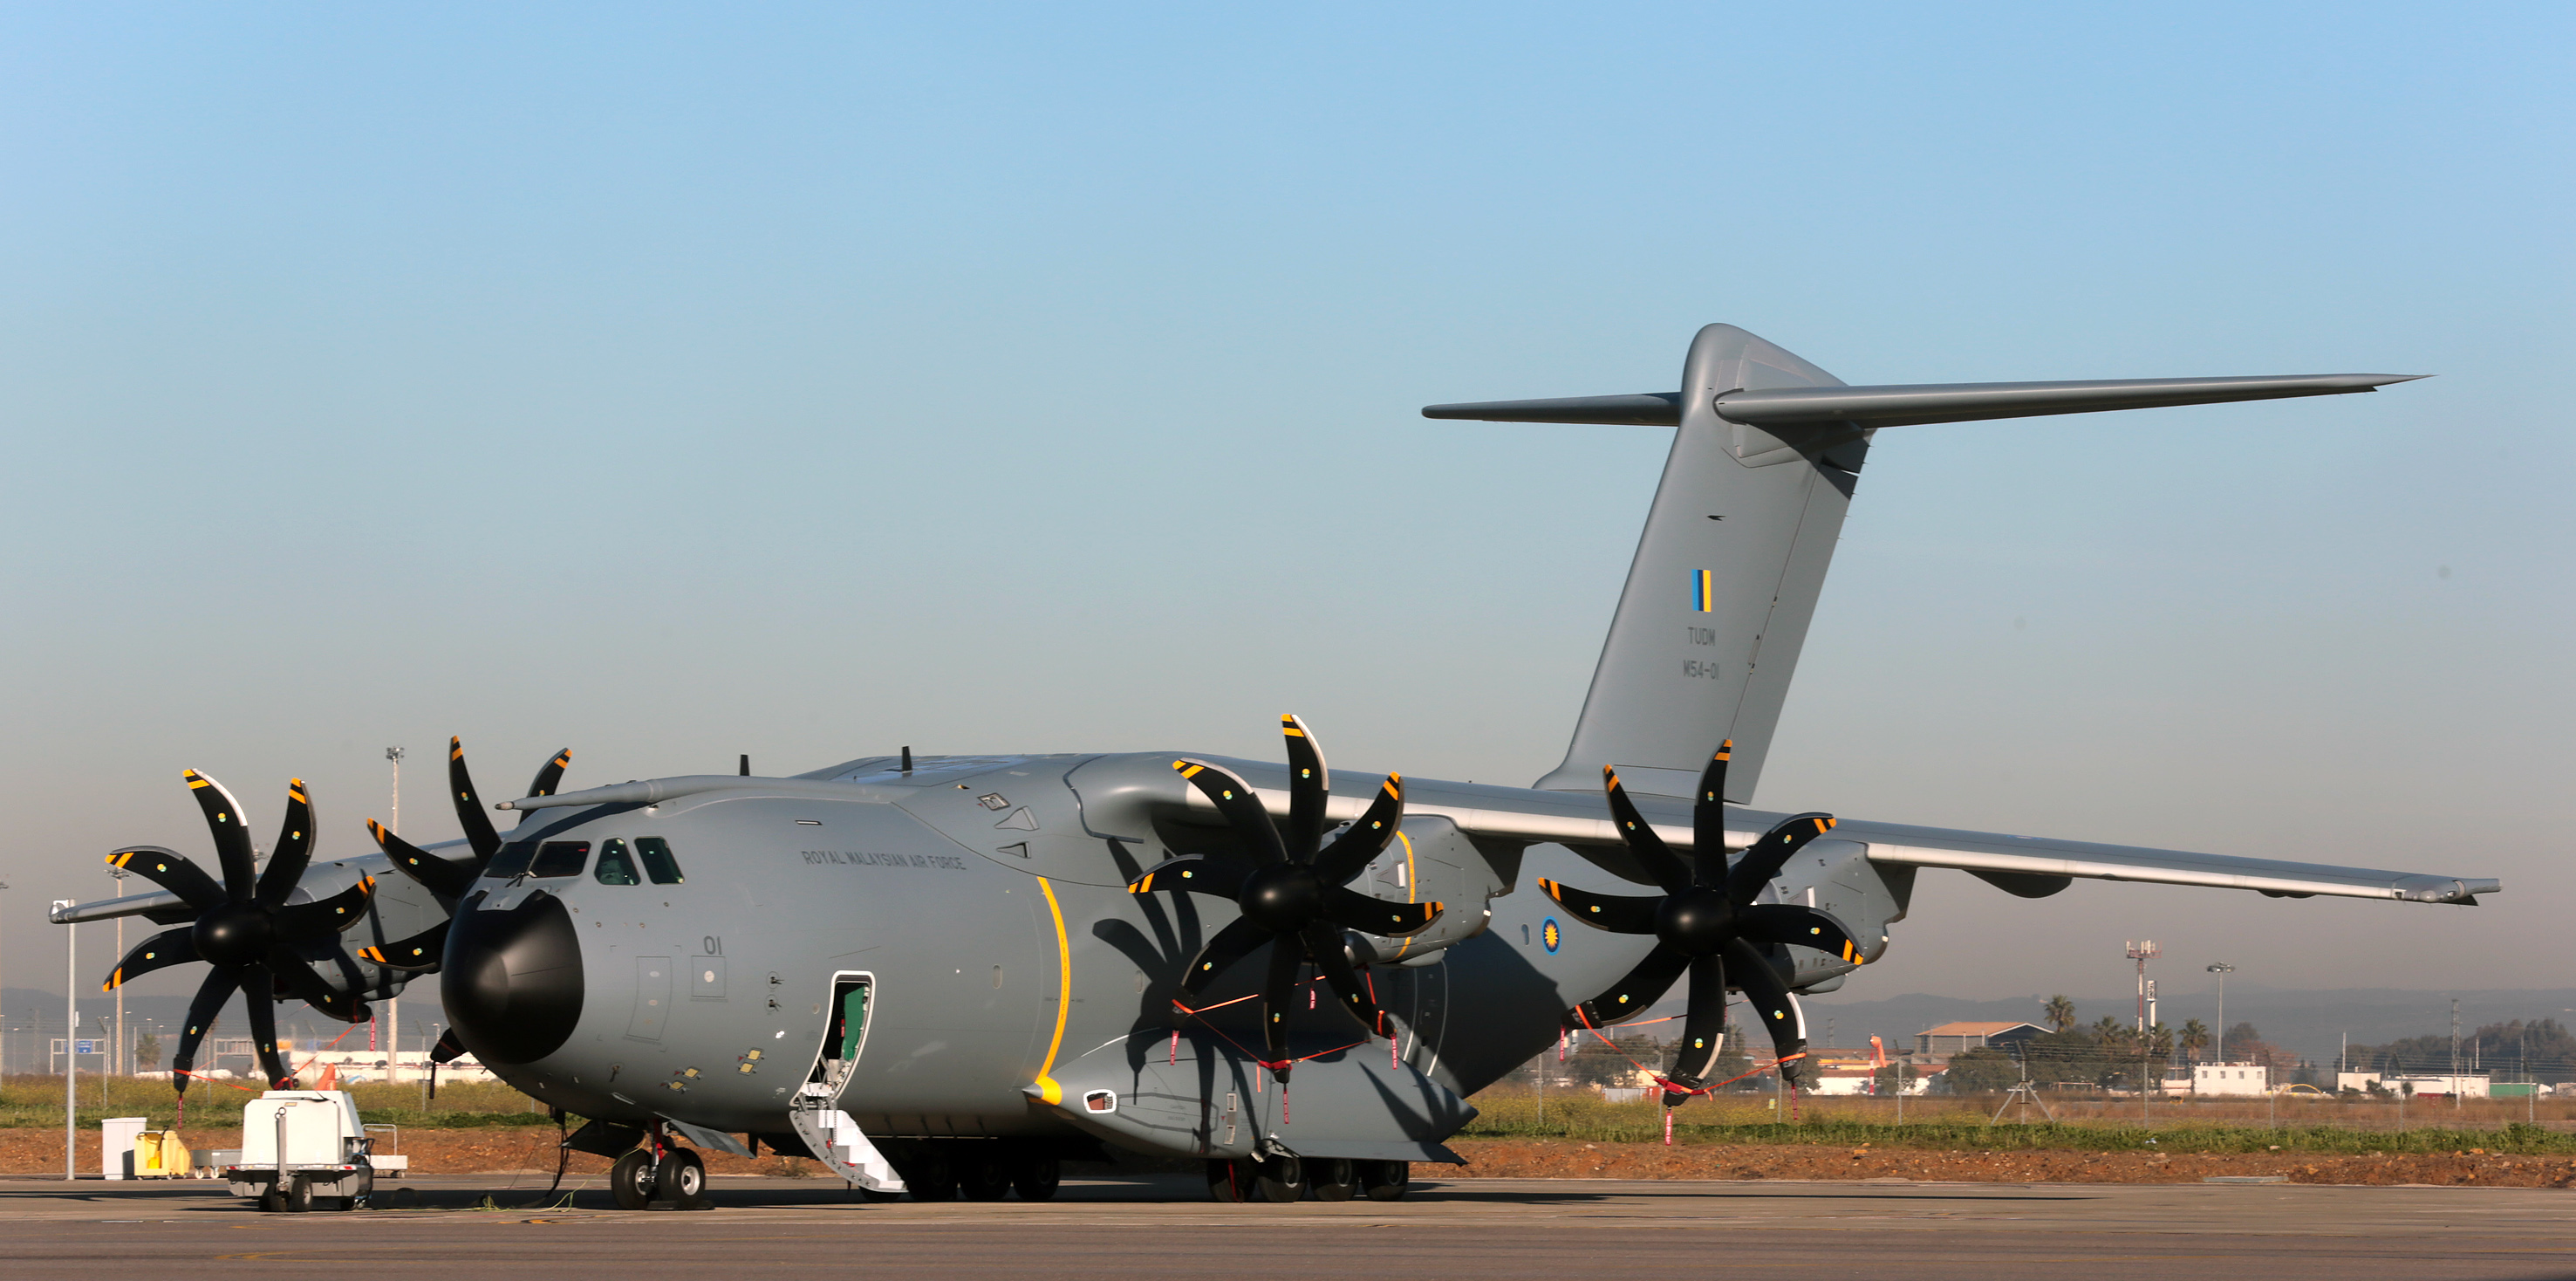 2953x1468 > Airbus A400M Wallpapers